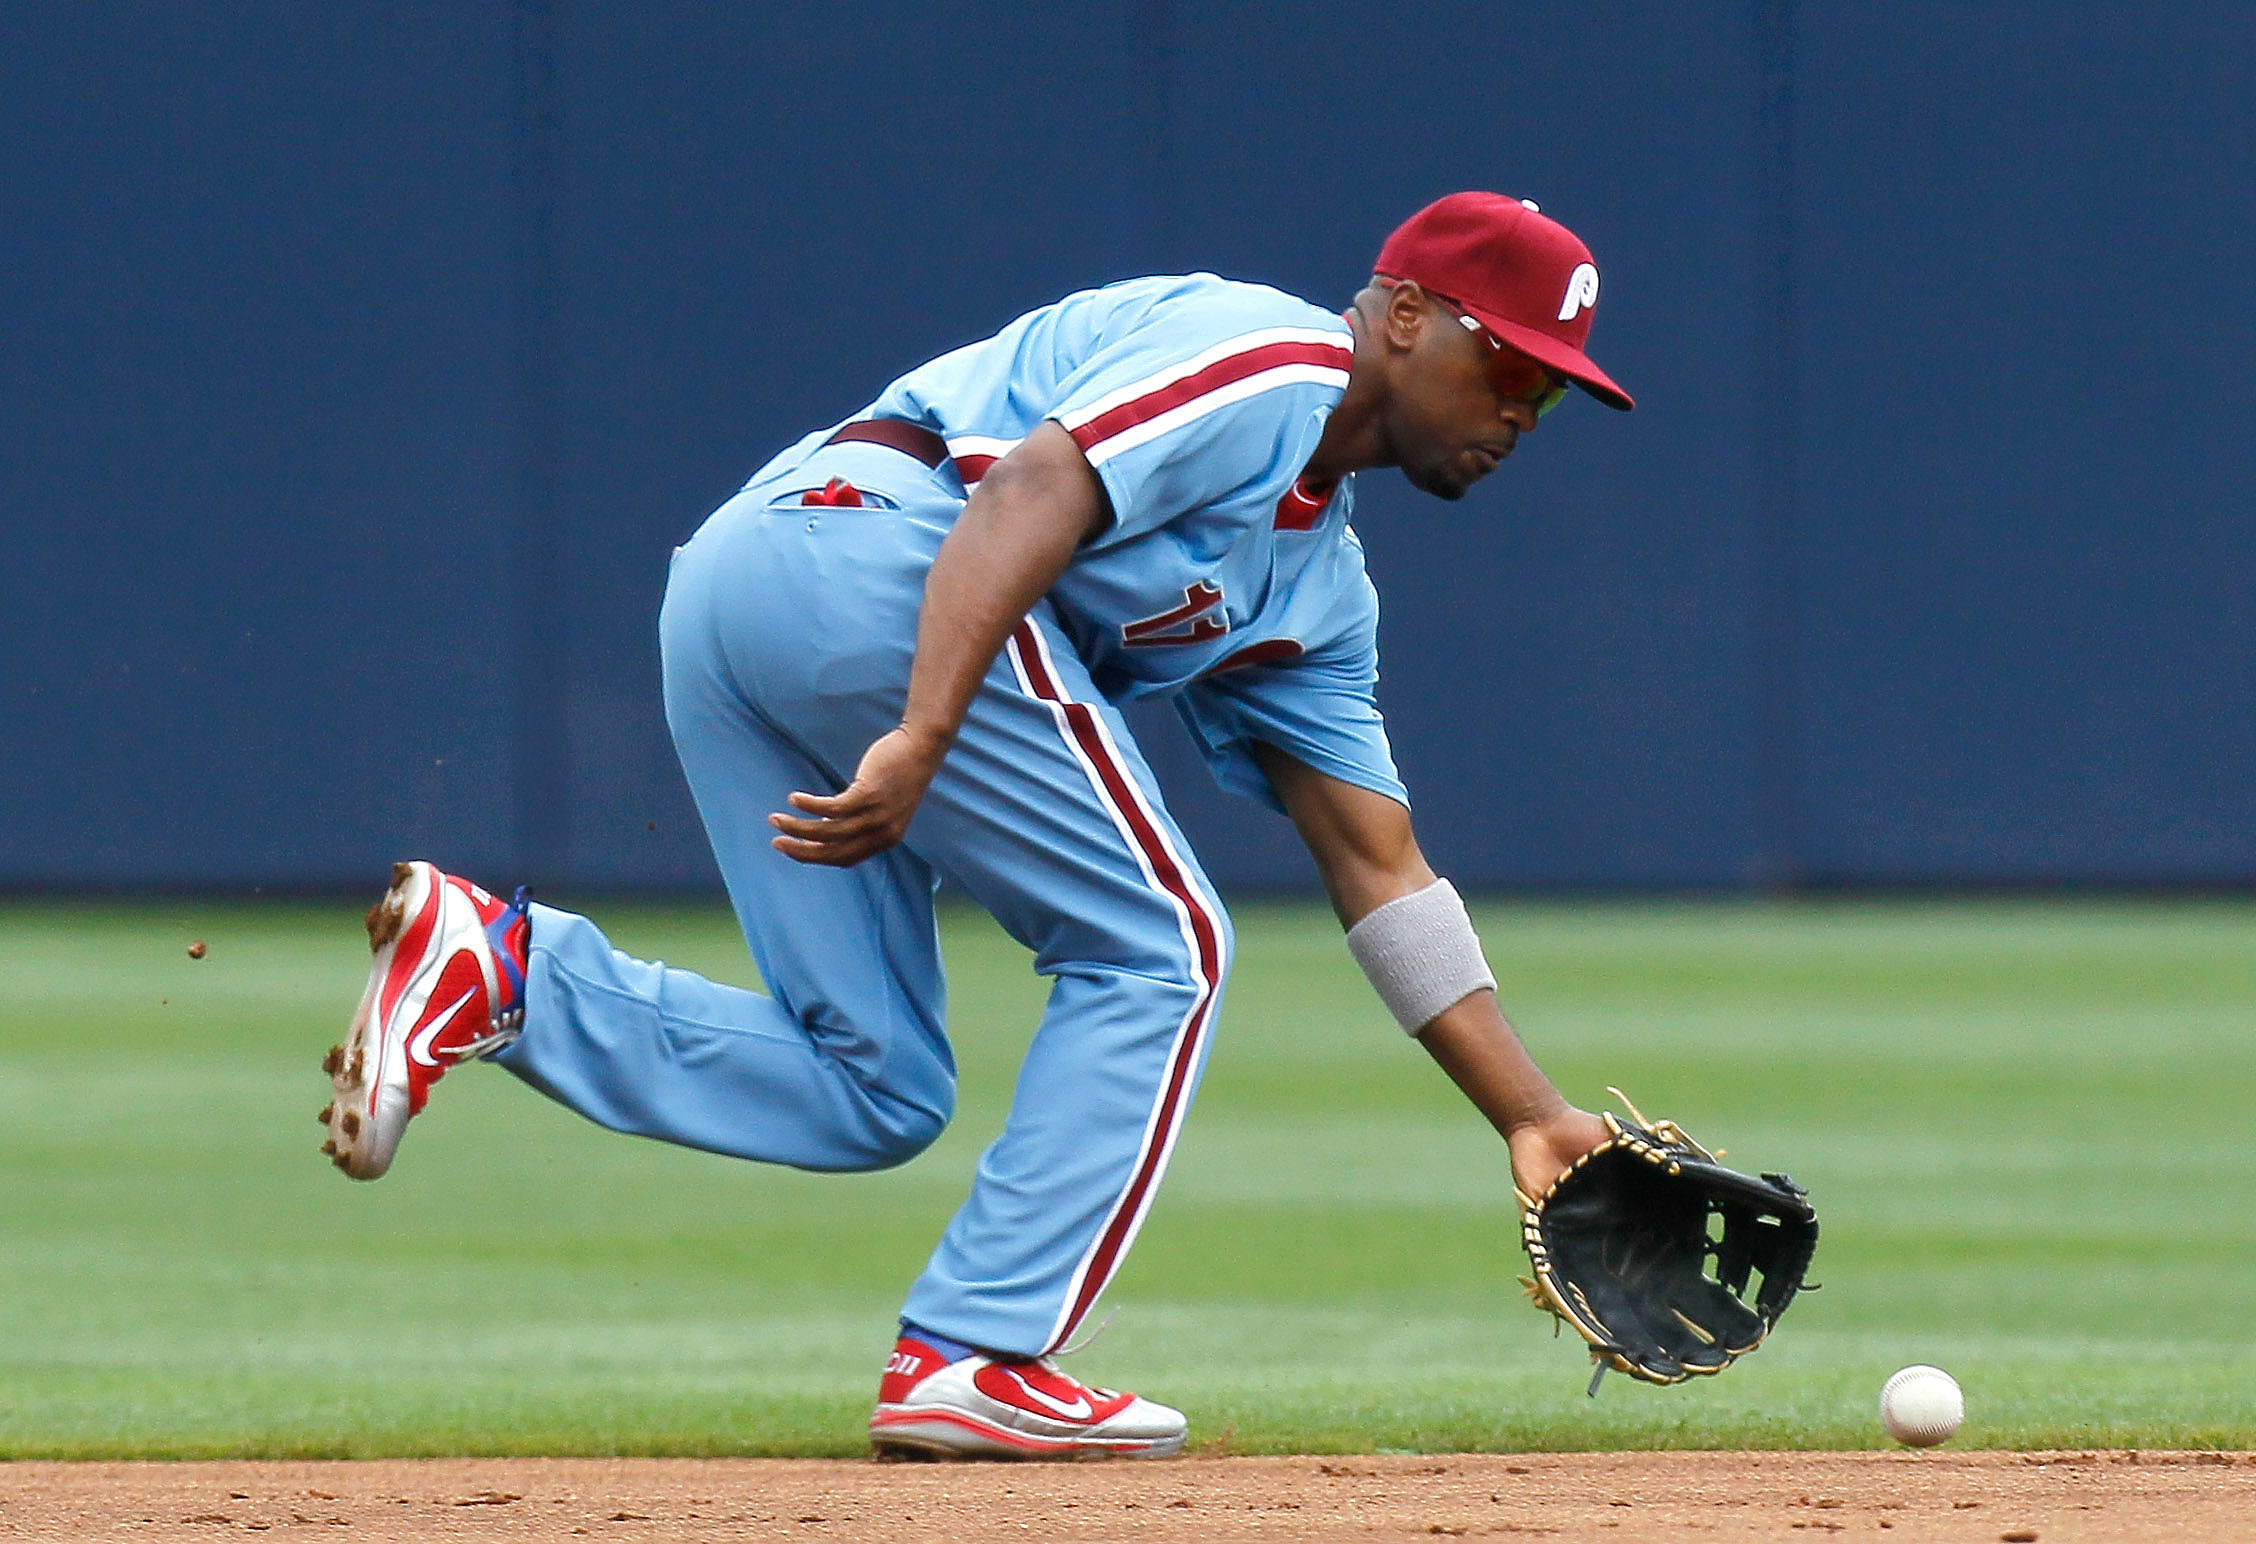 What Uniforms Are The Phillies Wearing Today?